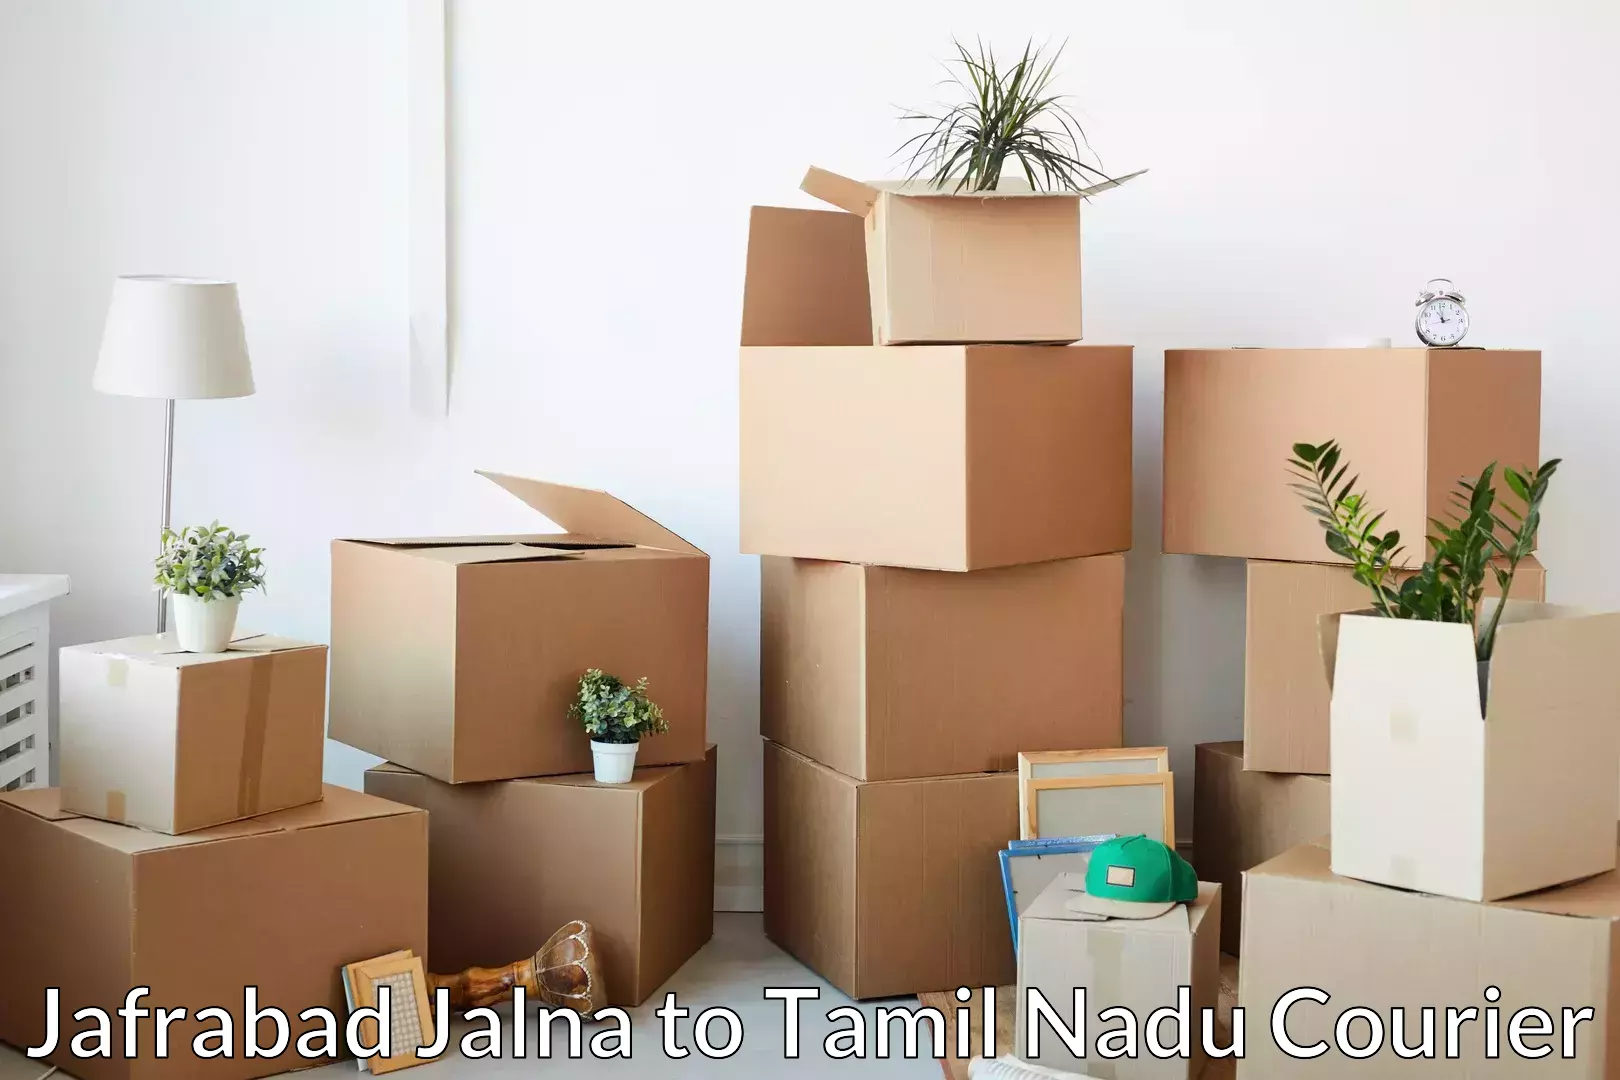 Professional packing and transport Jafrabad Jalna to Melur